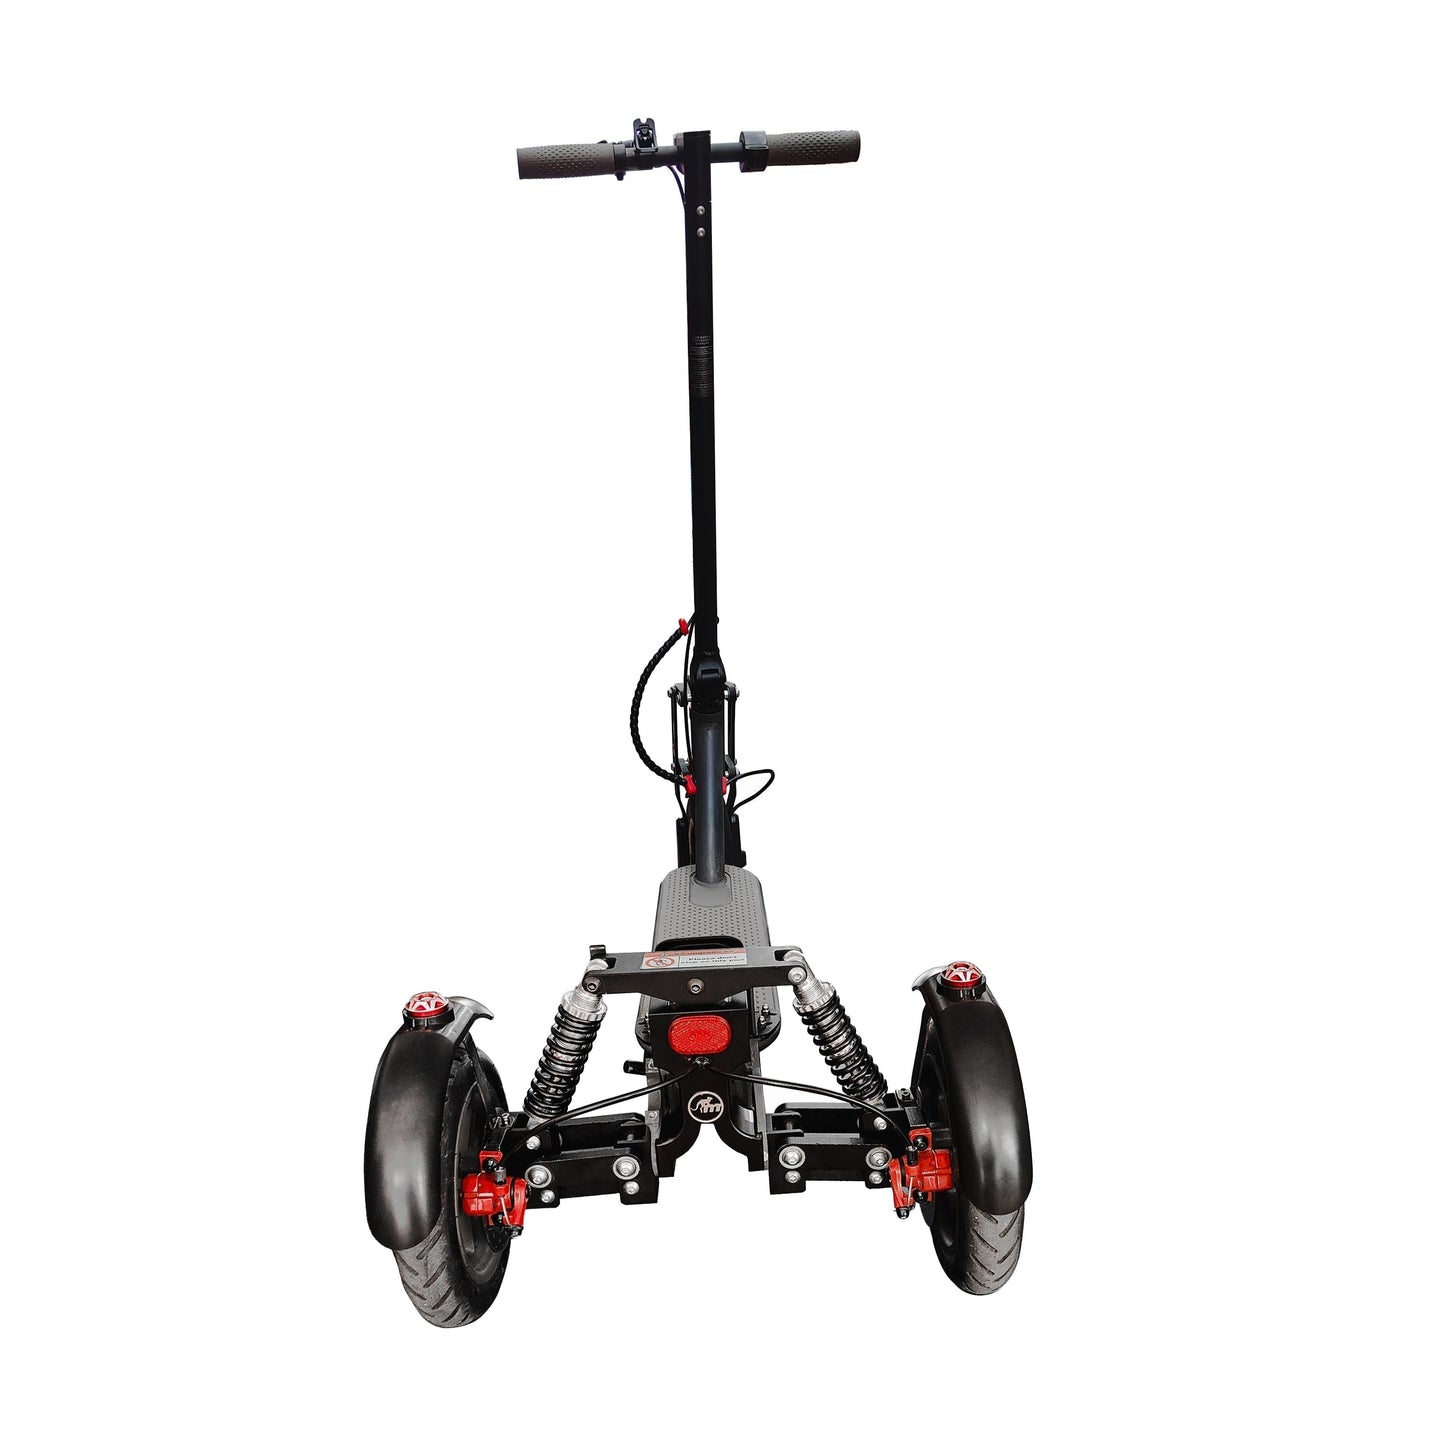 Monorim X3 upgrade kit to be Three wheels special for Hover-1 journey Scooter